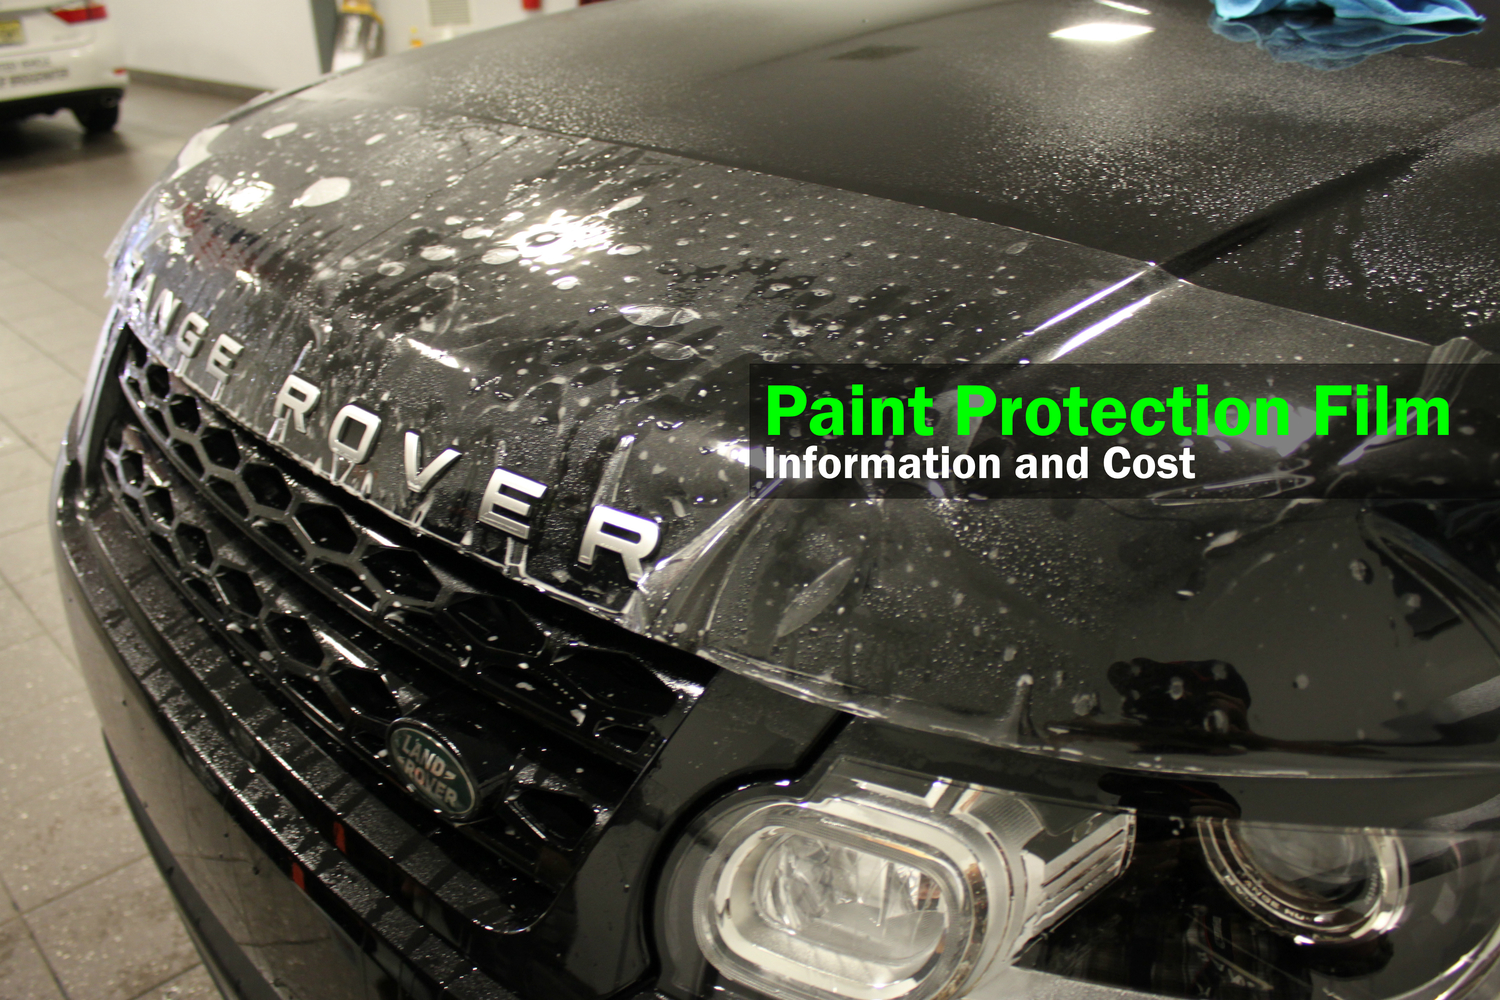 The Cost of Paint Protection Film - RallyWays